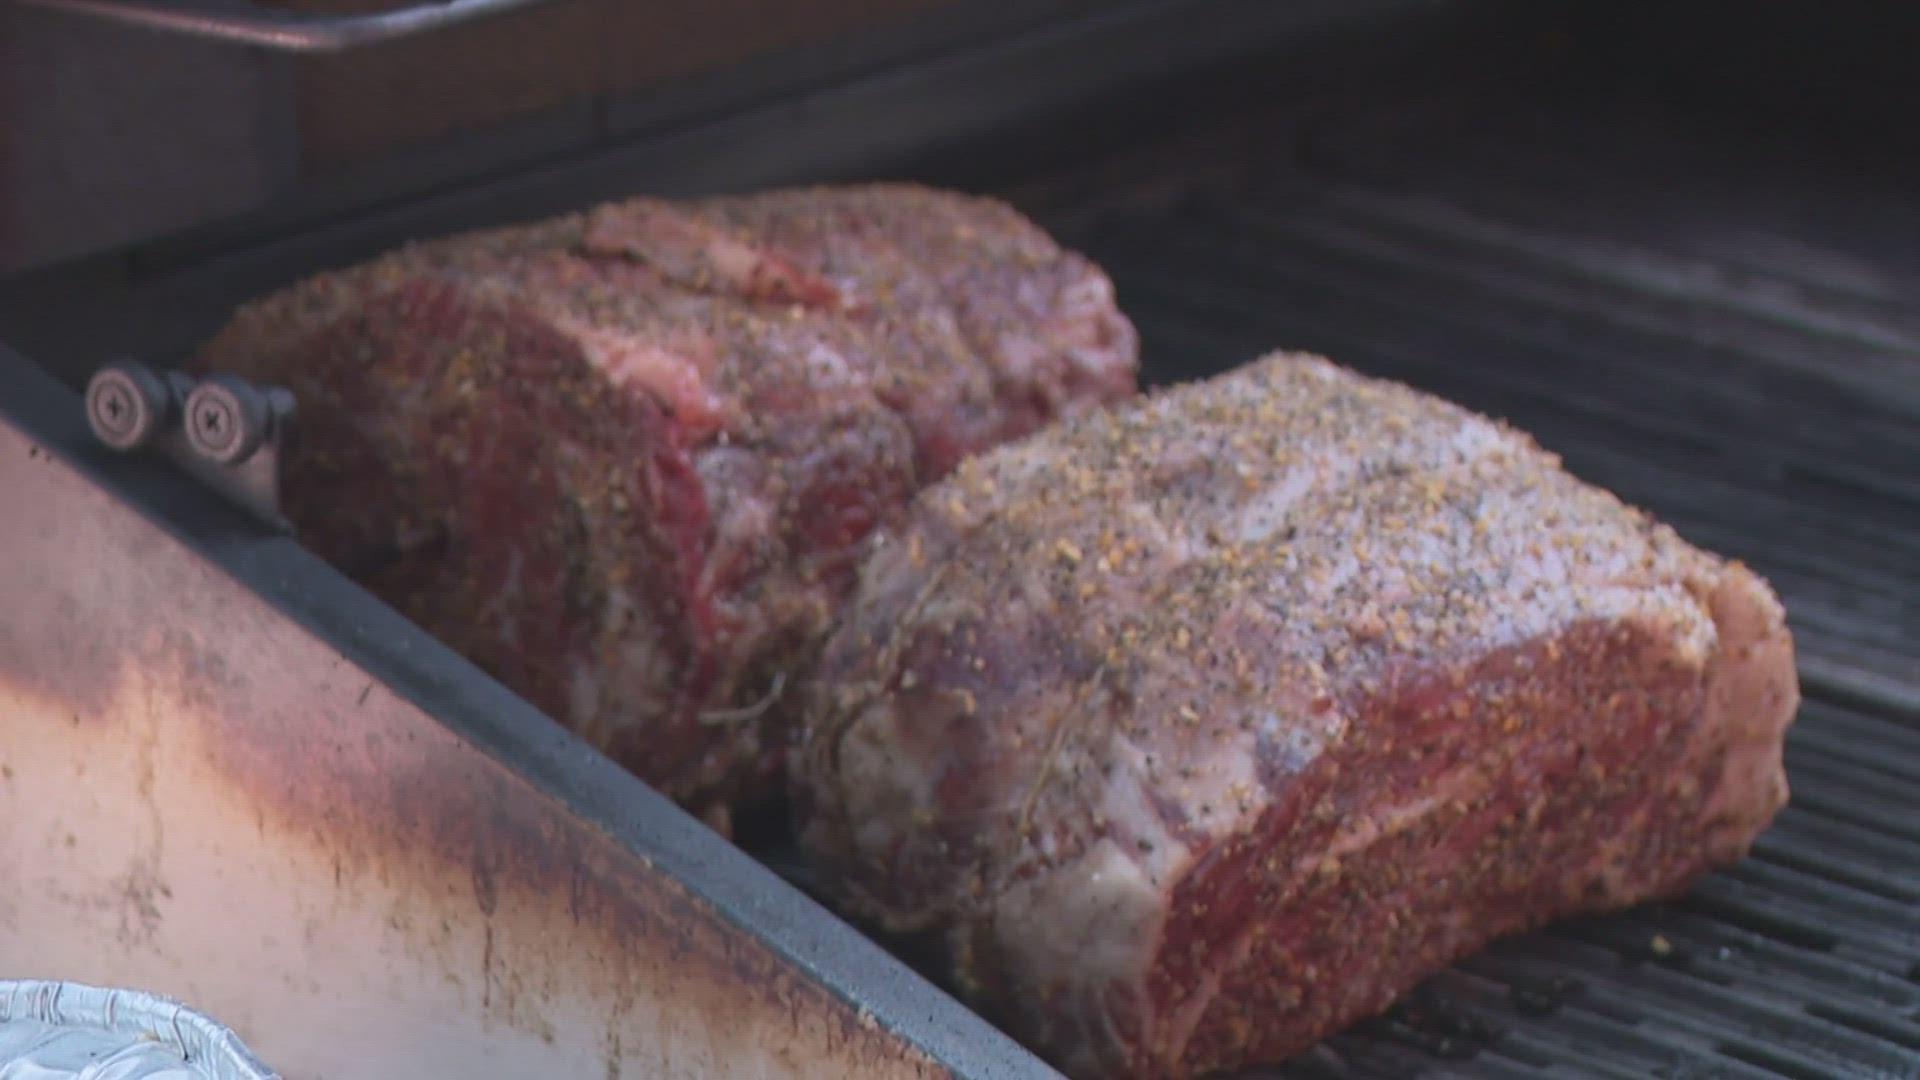 Tom's back on the grill to cook up grilled prime rib roast!